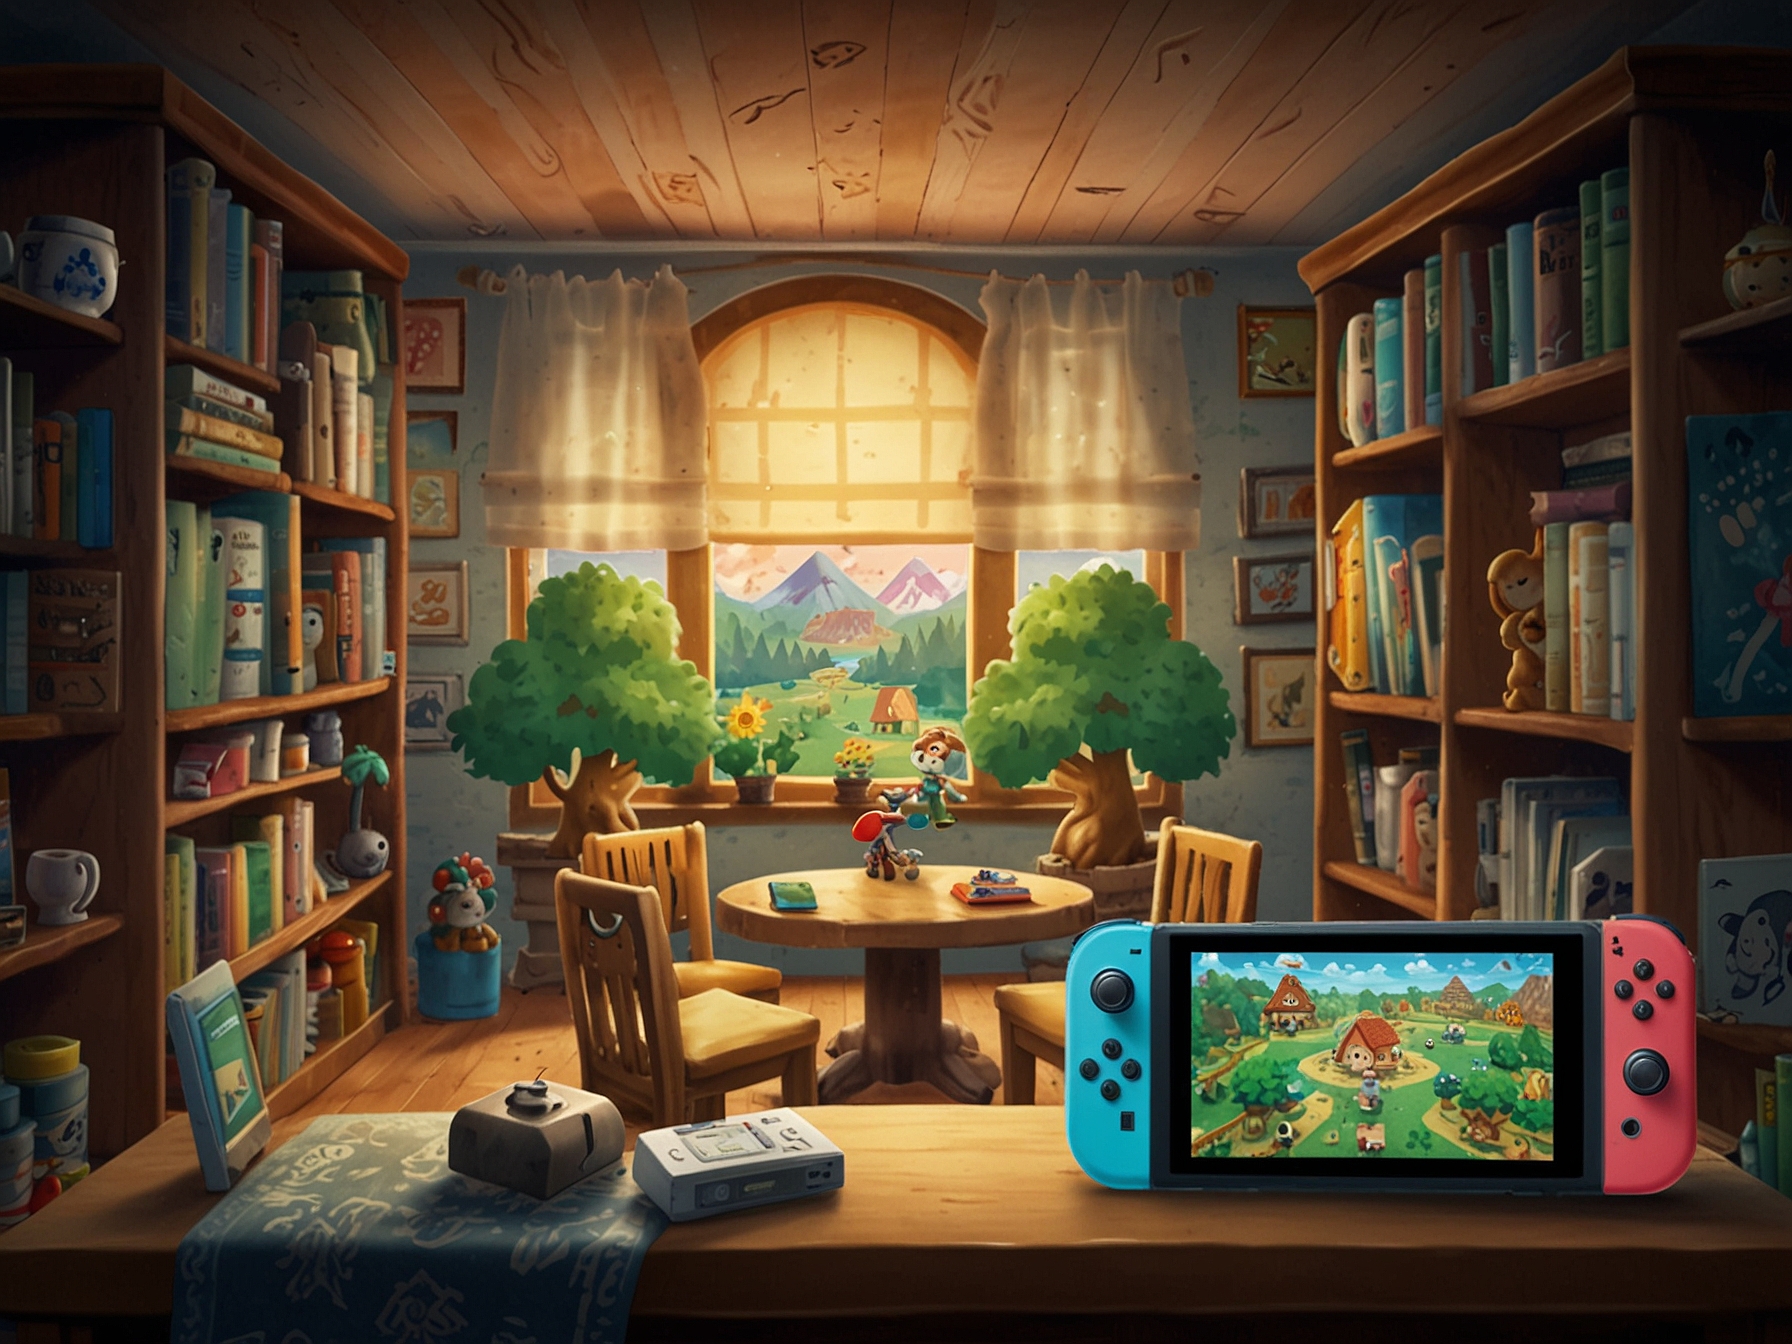 Snapshot of various popular games available for the Nintendo Switch Lite, including 'Animal Crossing: New Horizons' and 'The Legend of Zelda: Breath of the Wild,' illustrating the extensive game library.